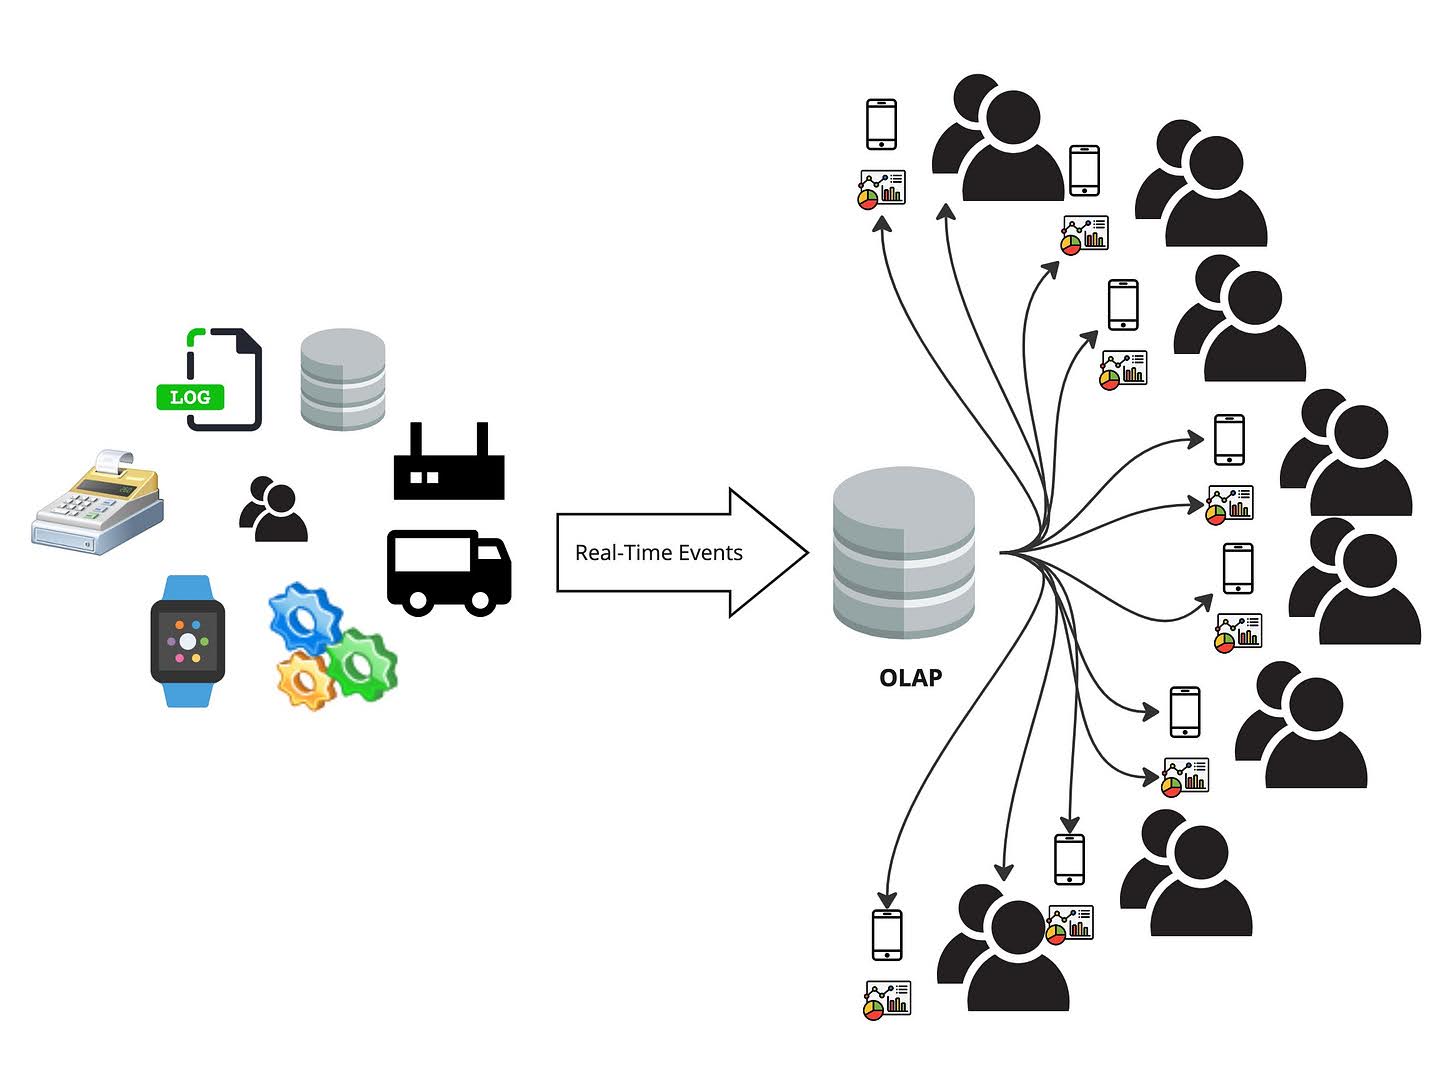 Diagram of the need for high concurrency with OLAP queries from real-time events